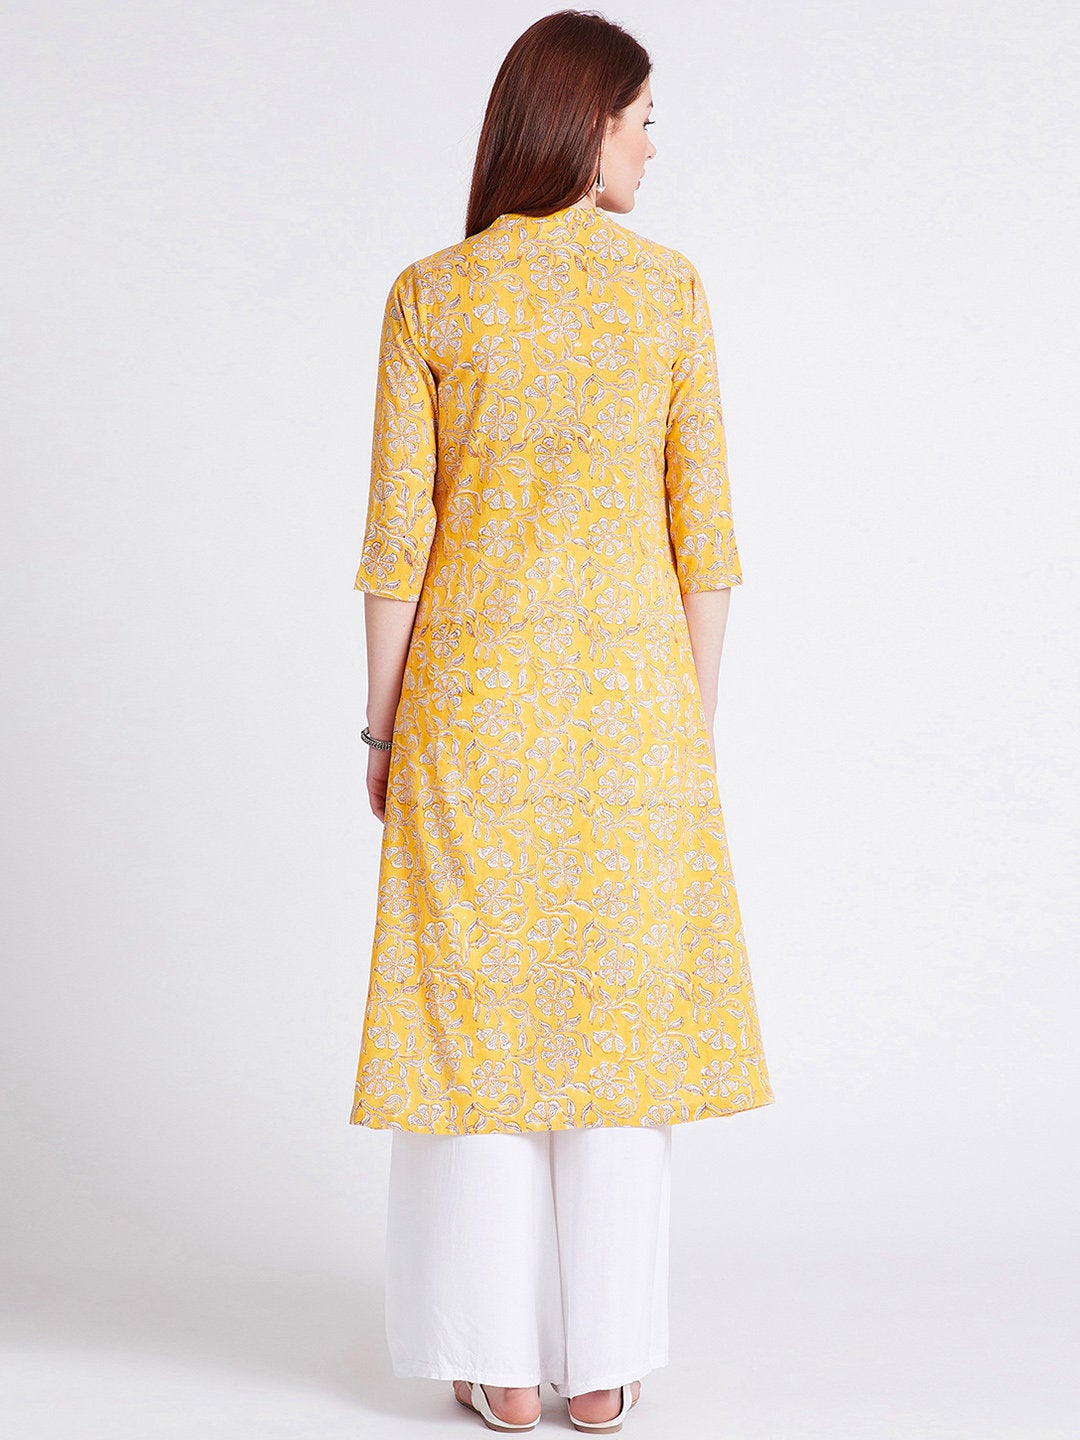 Hand block printed long kurta with front slit in turmeric yellow colour with pockets with button detailing on front